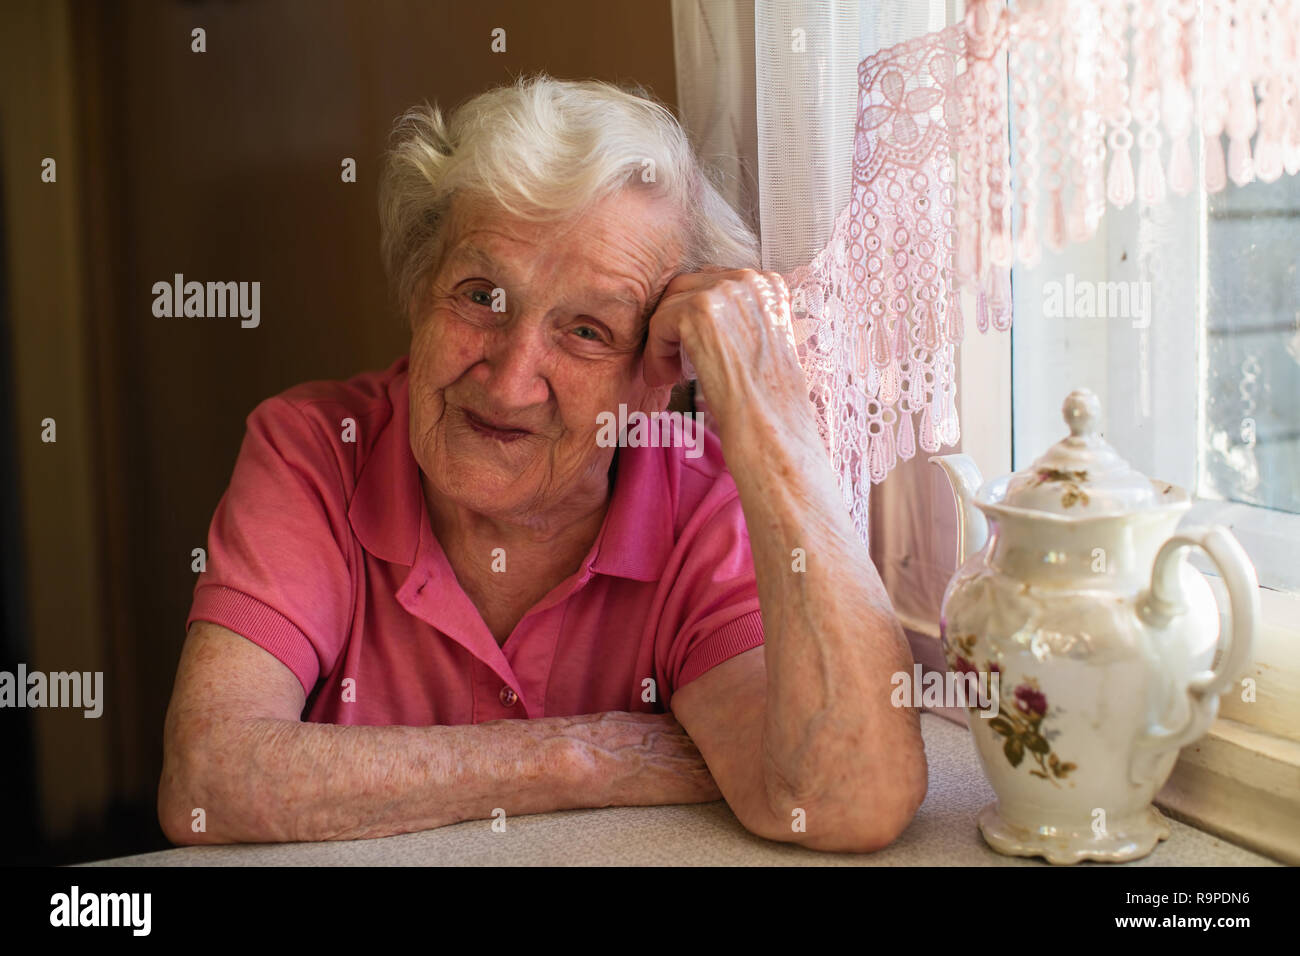 Portrait of elderly woman in her home at kitchen. Stock Photo